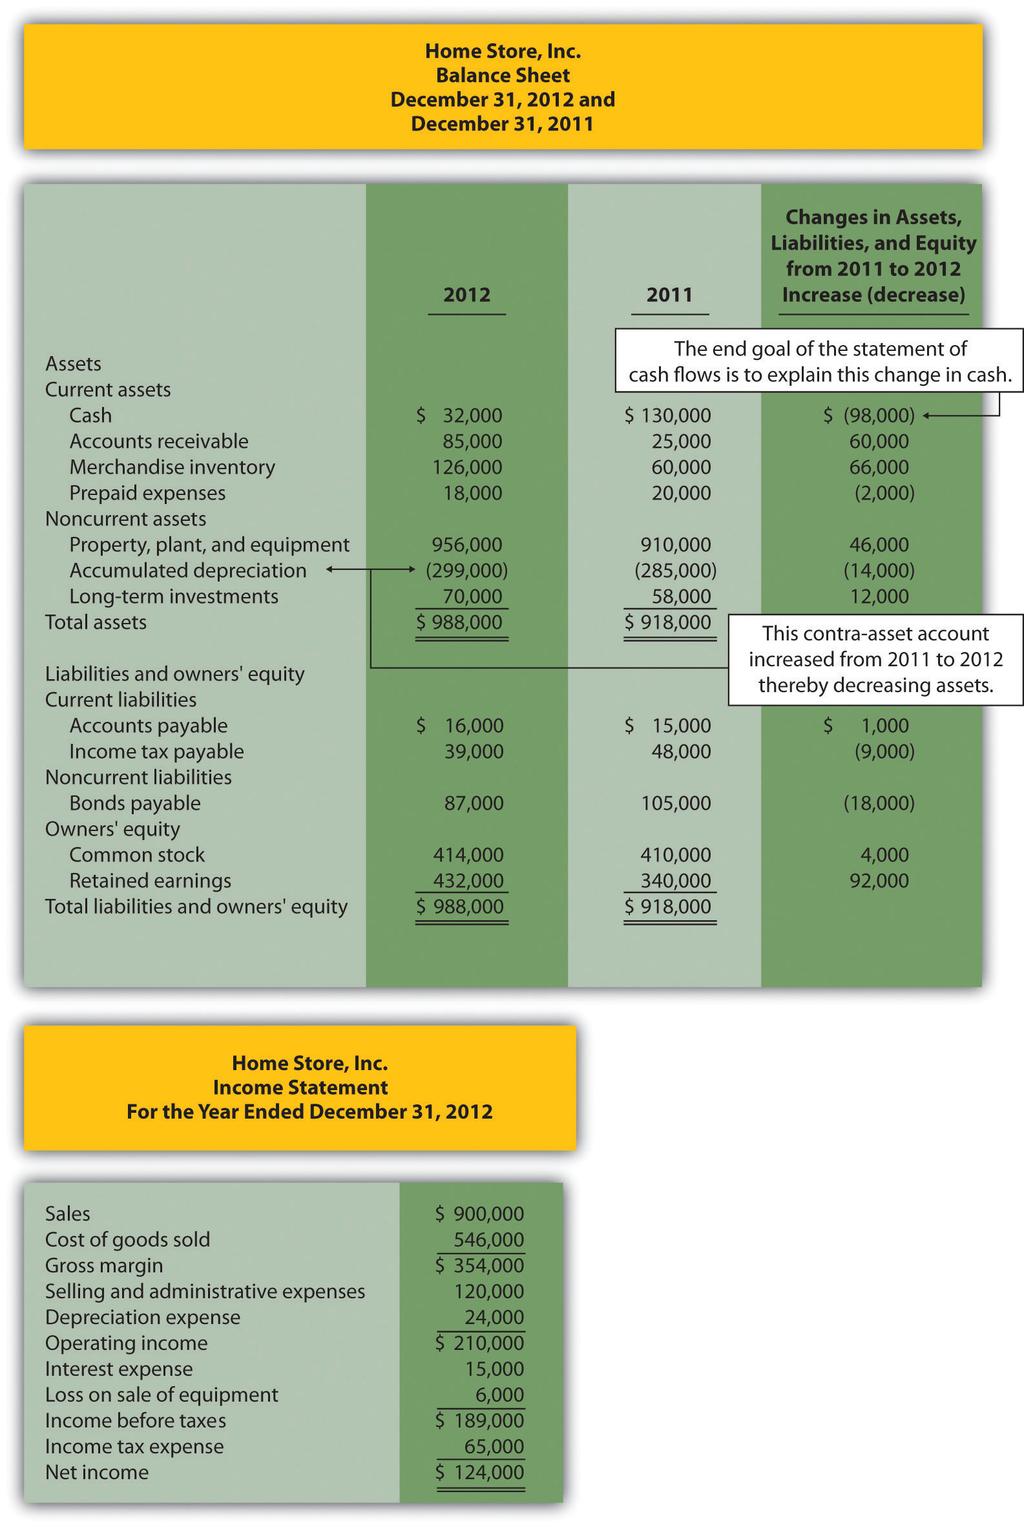 Figure 12.3 Balance Sheet and Income Statement for Home Store, Inc.